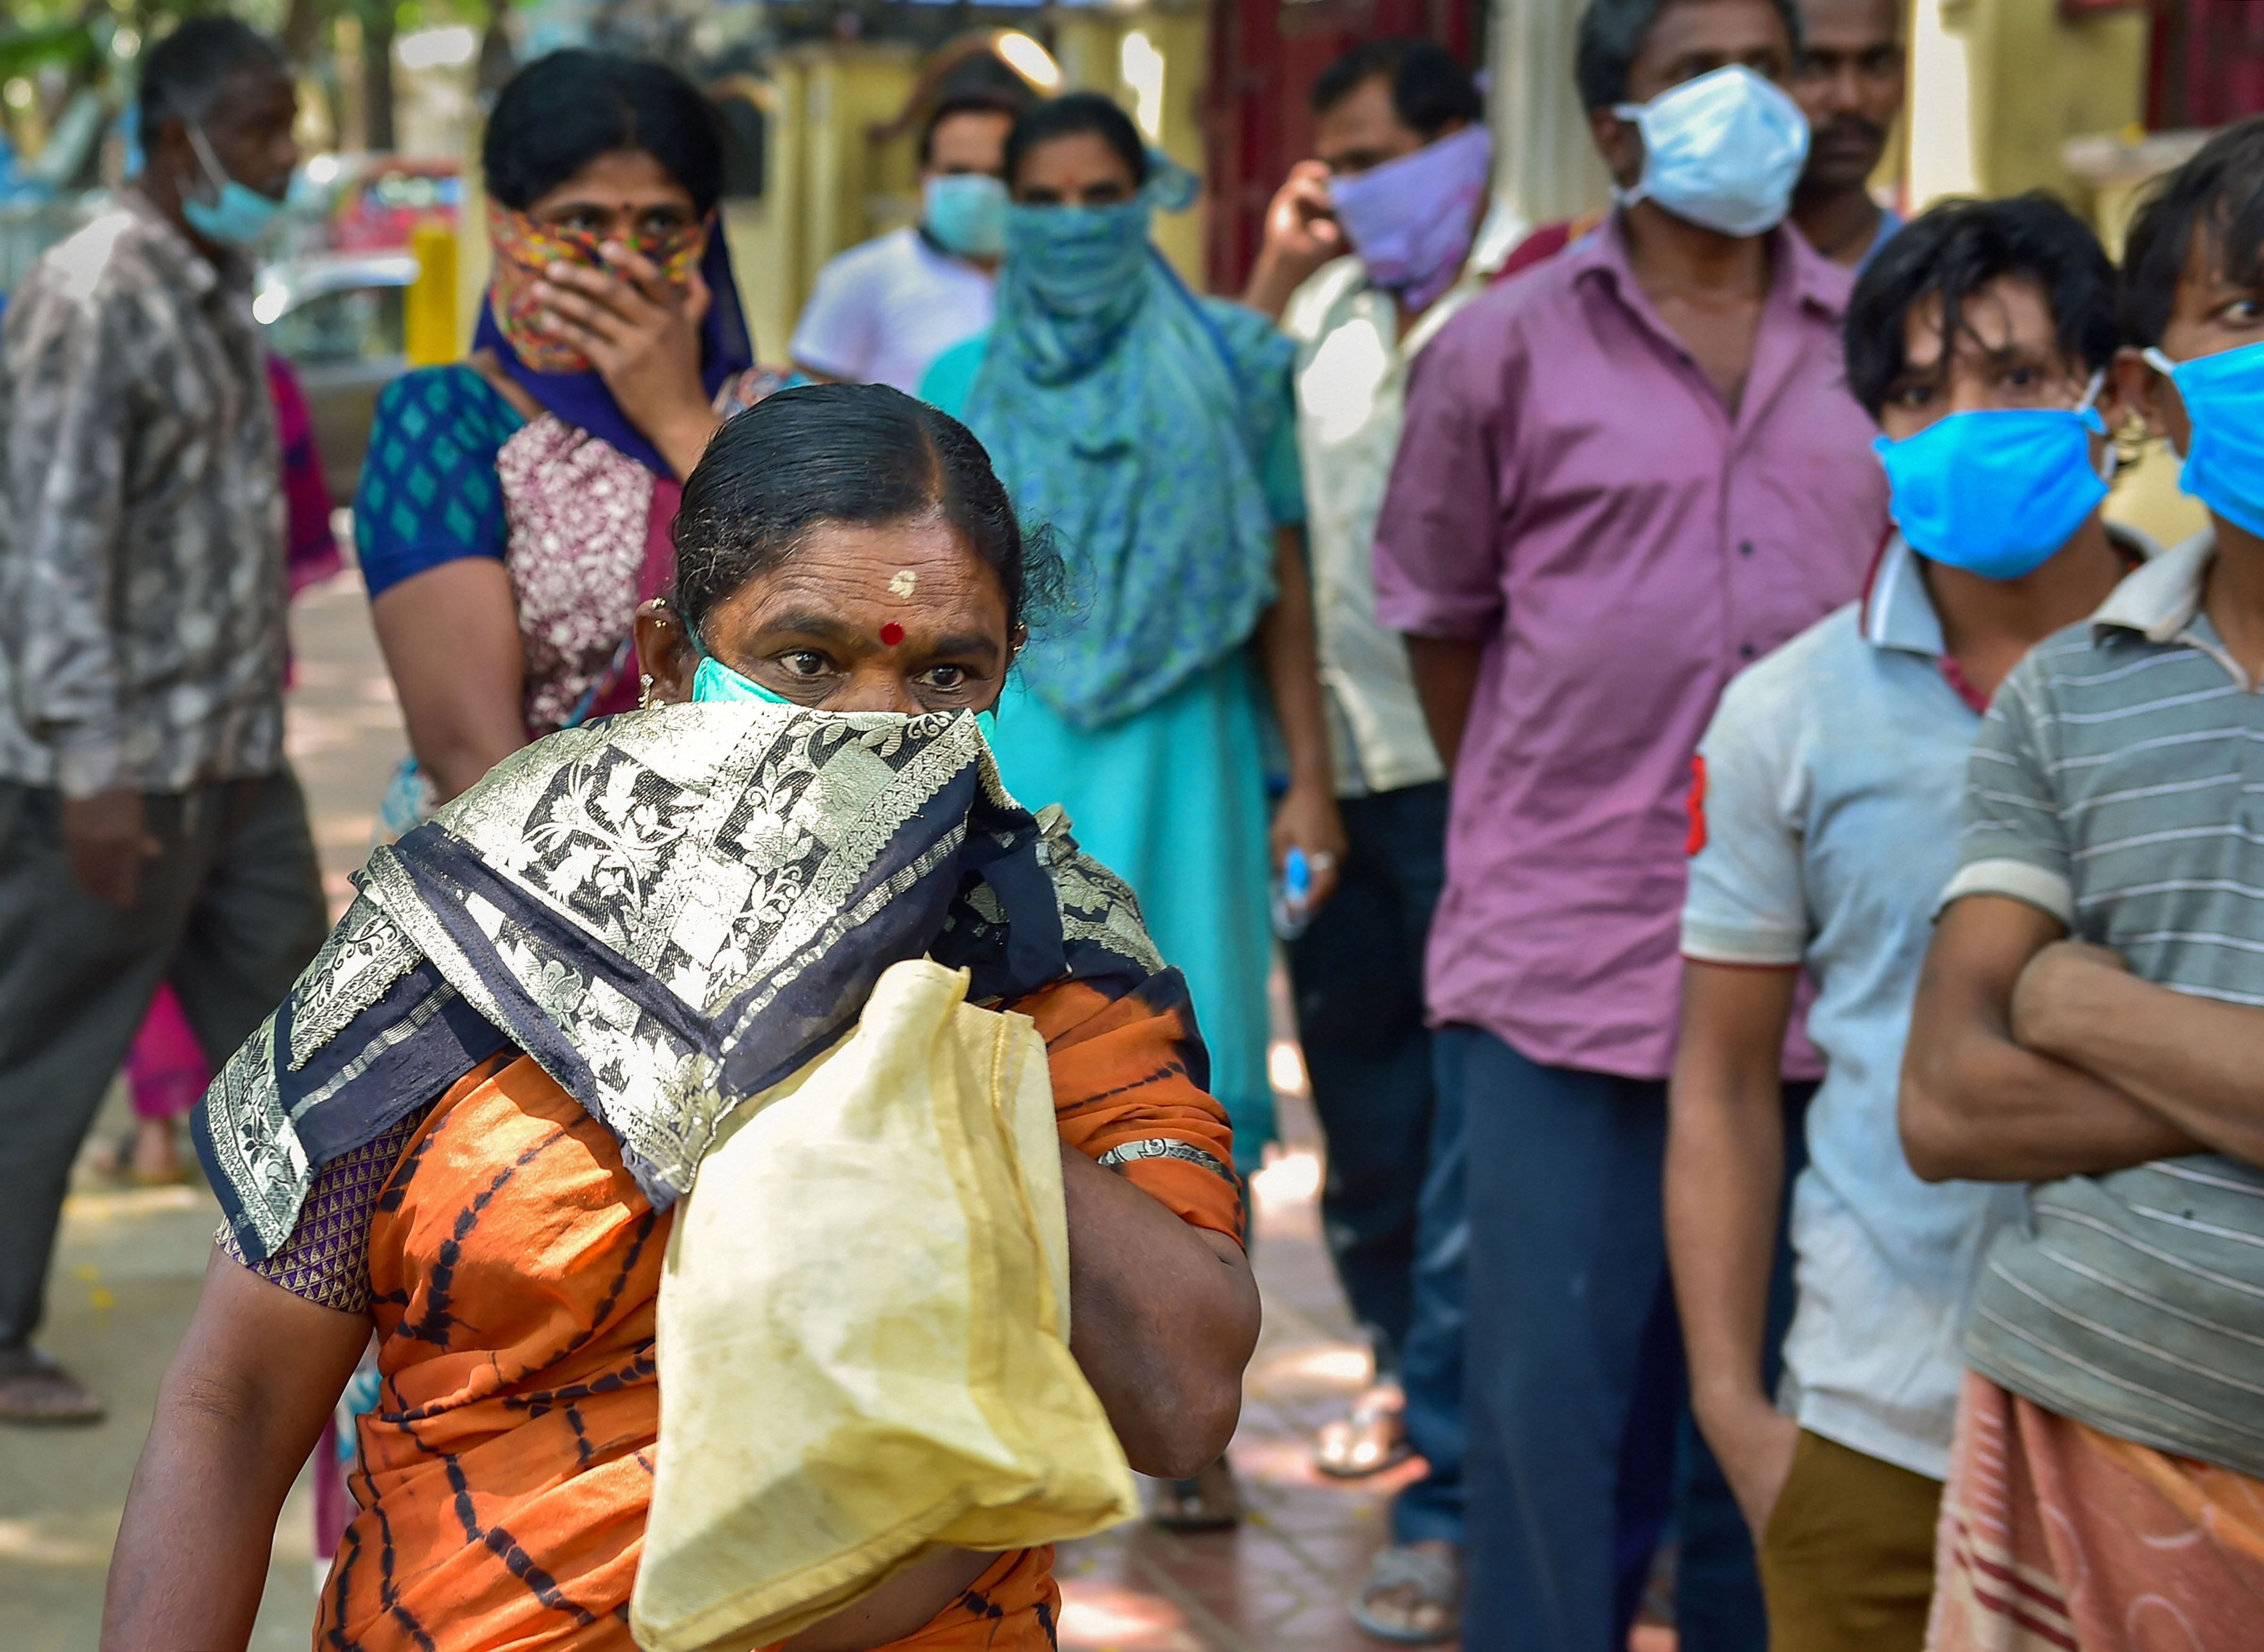 People stand in a queue to receive ration during a nationwide lockdown imposed in the wake of coronavirus pandemic. (PTI Photo)